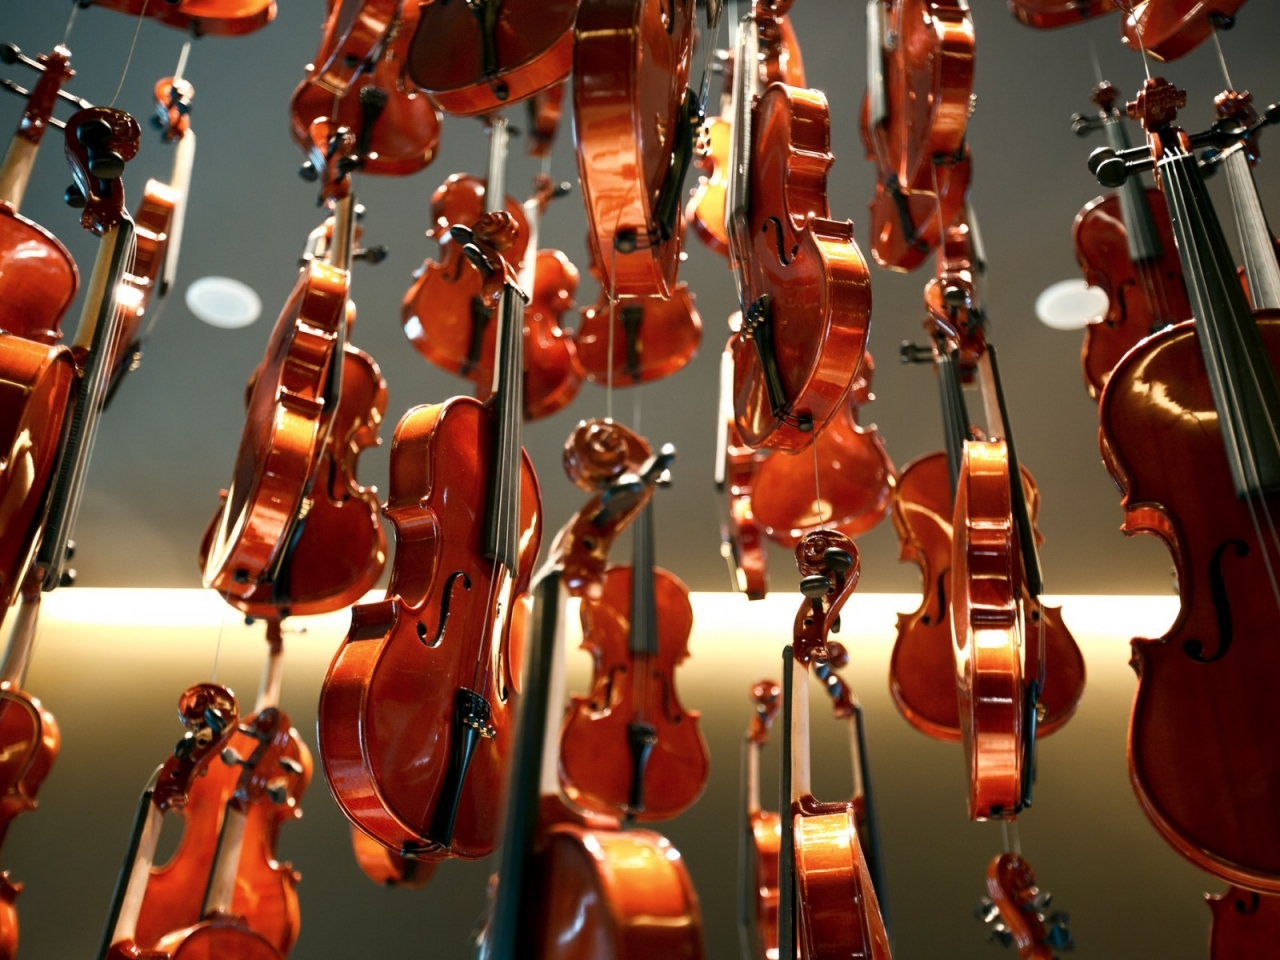 New Violins for 1280 x 960 resolution